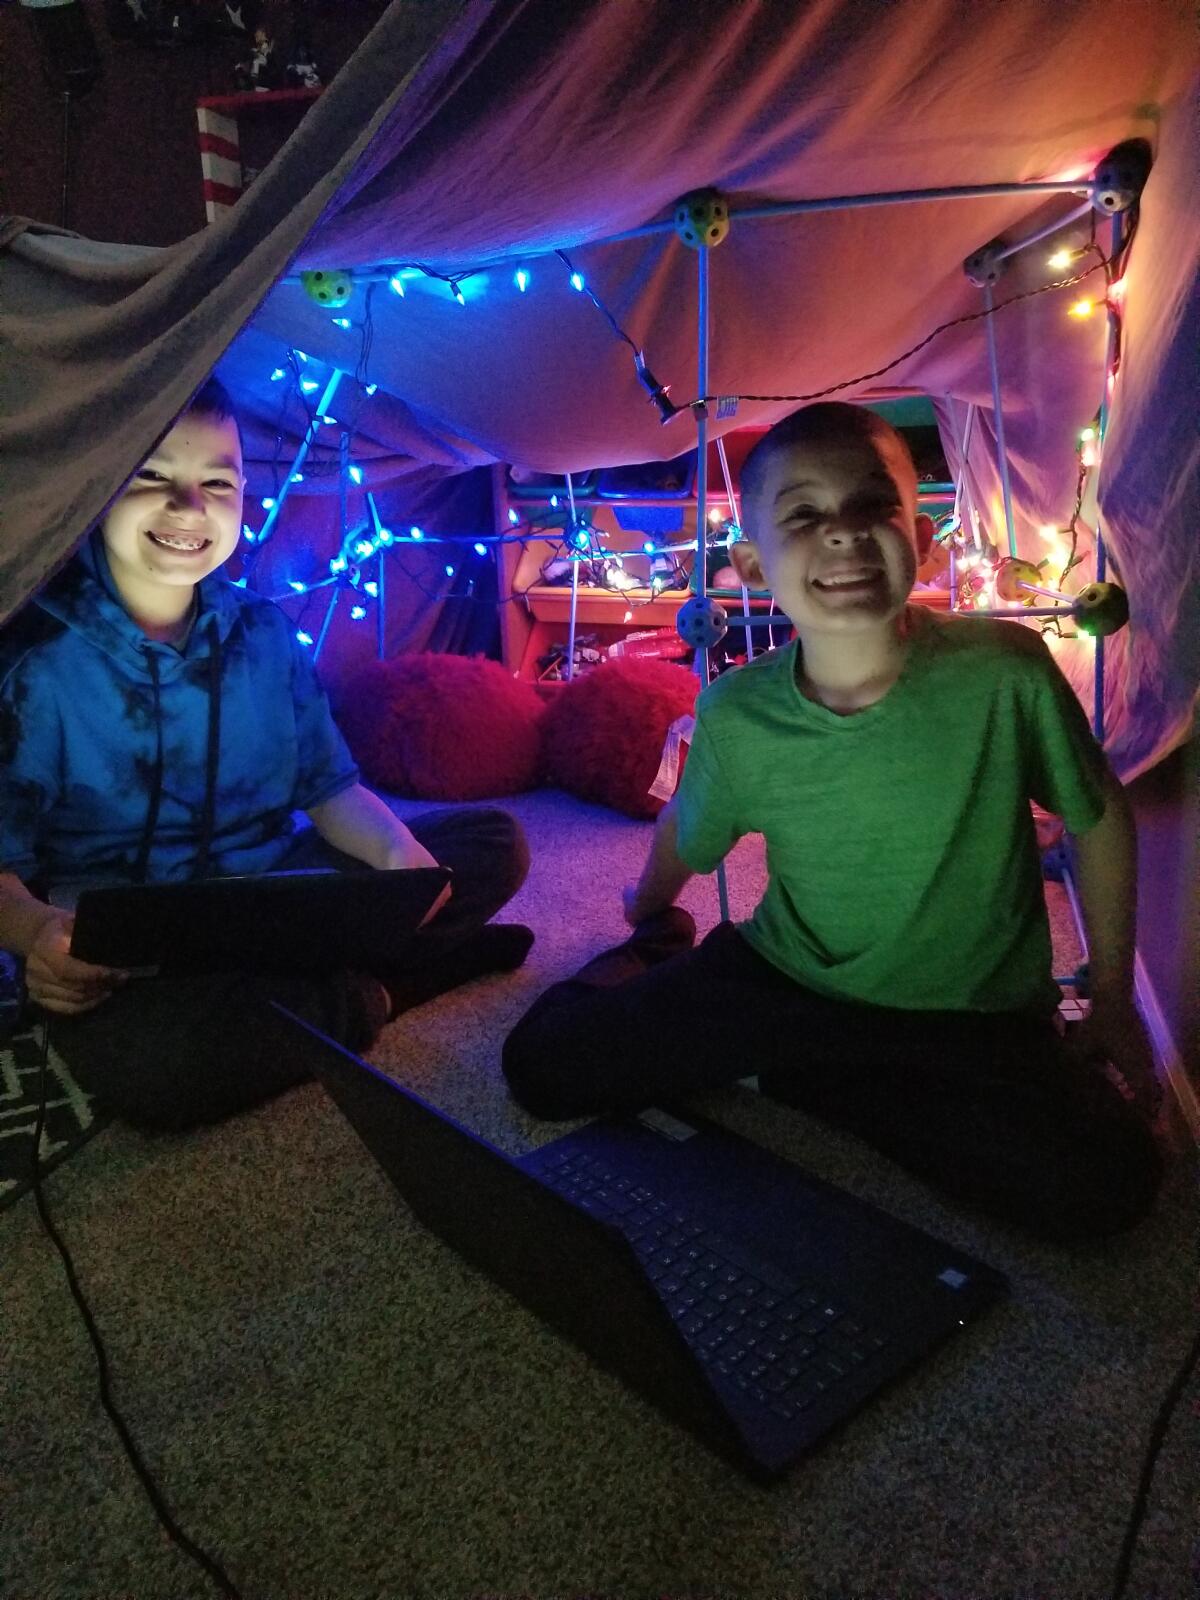 Children do their schoolwork in a fort at home due to school closures amid coronavirus concerns.